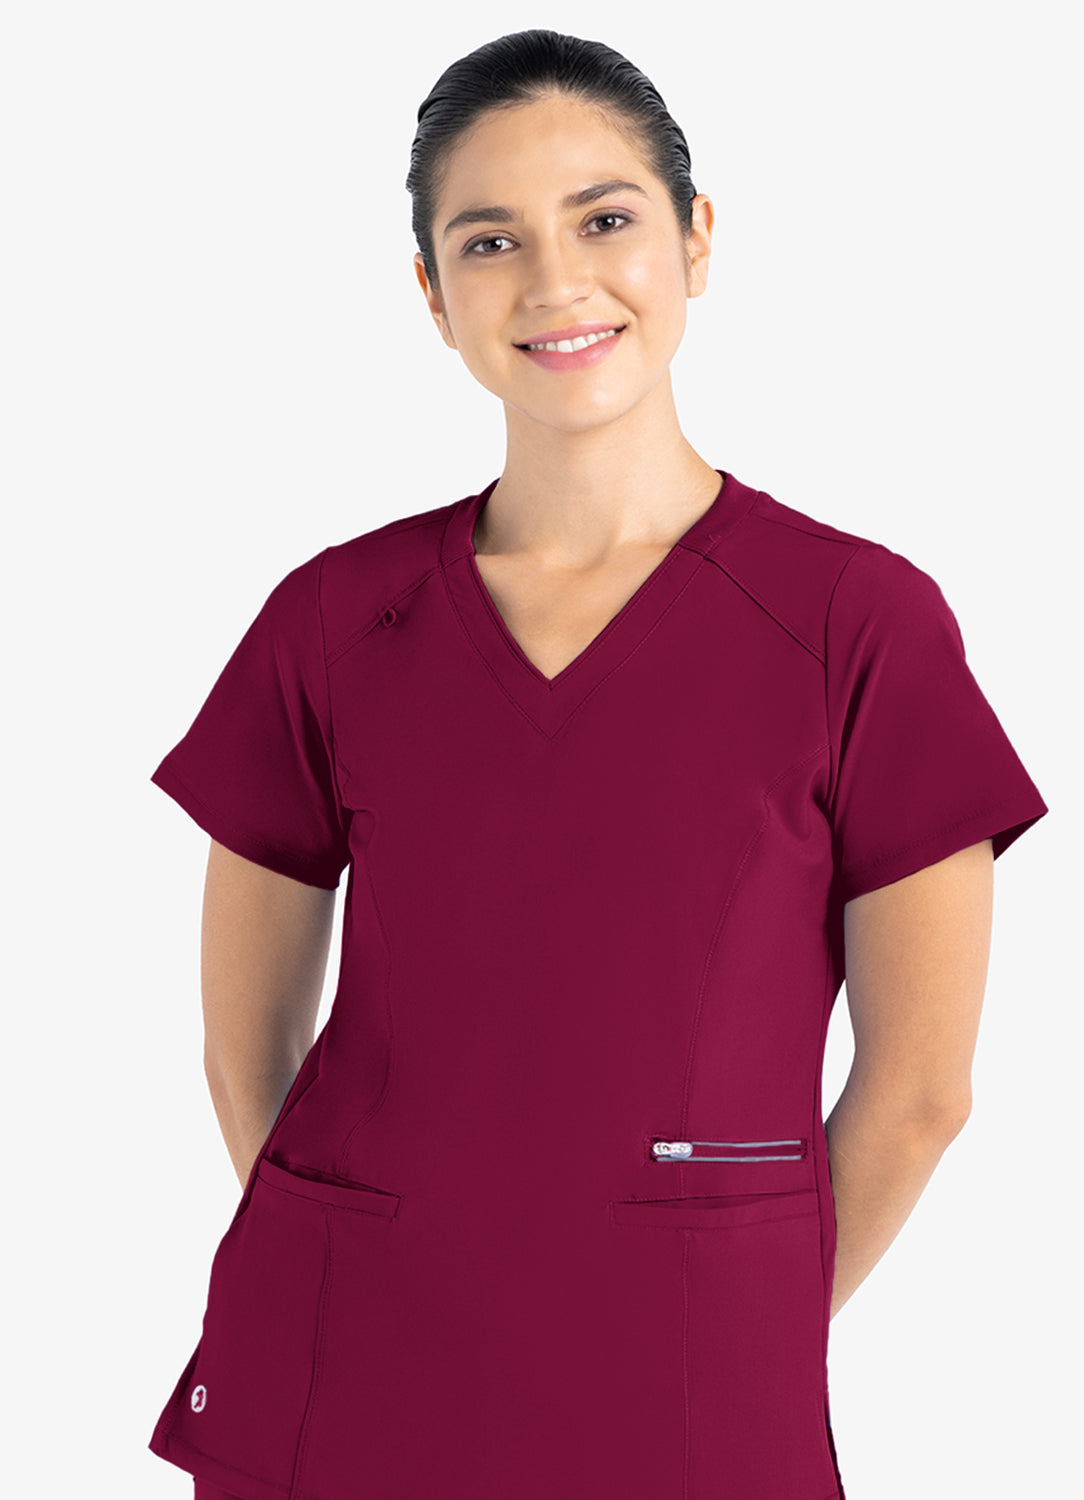 LIMITED EDITION LIFETHREADS WOMEN’S ACTIVE SCRUB TOP